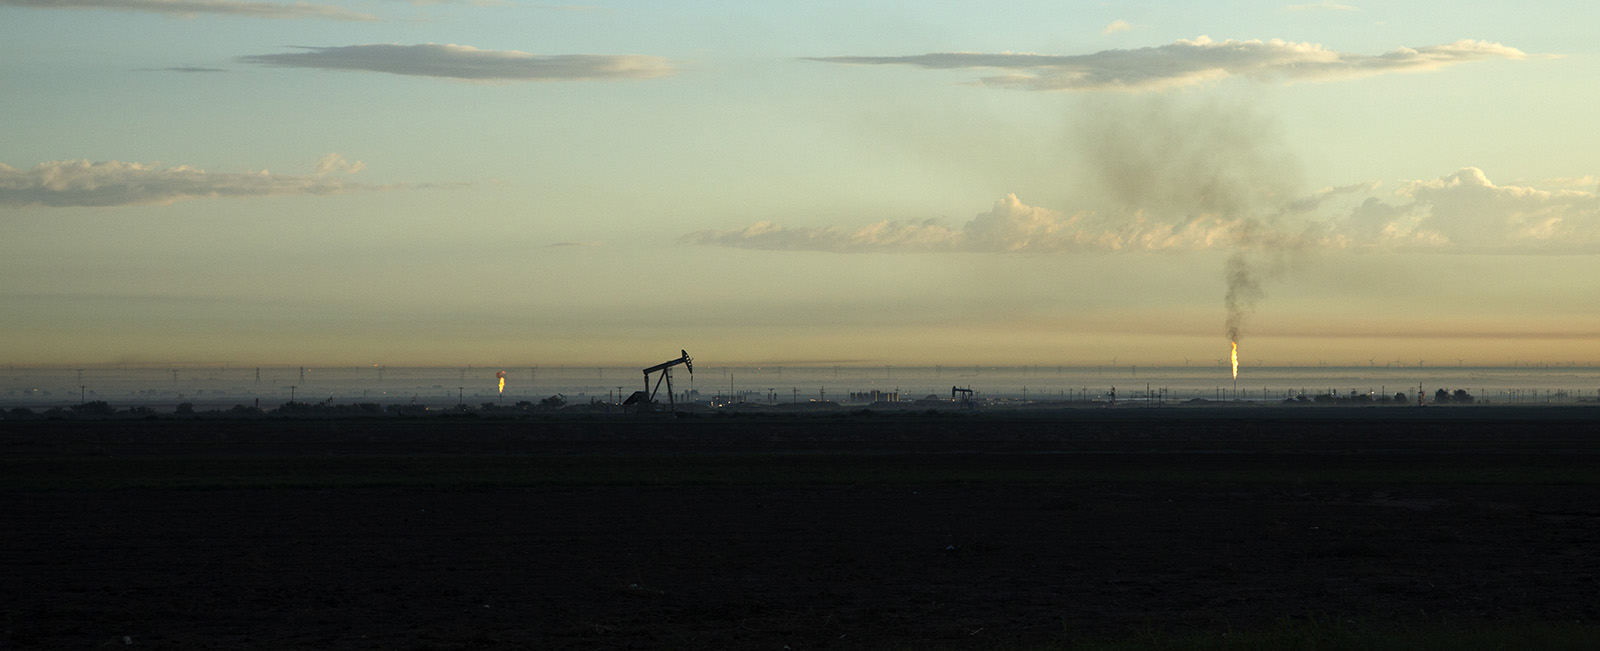 Midland Basin sunrise with oil pump jacks and natural gas flares contributing to ground haze in early morning.